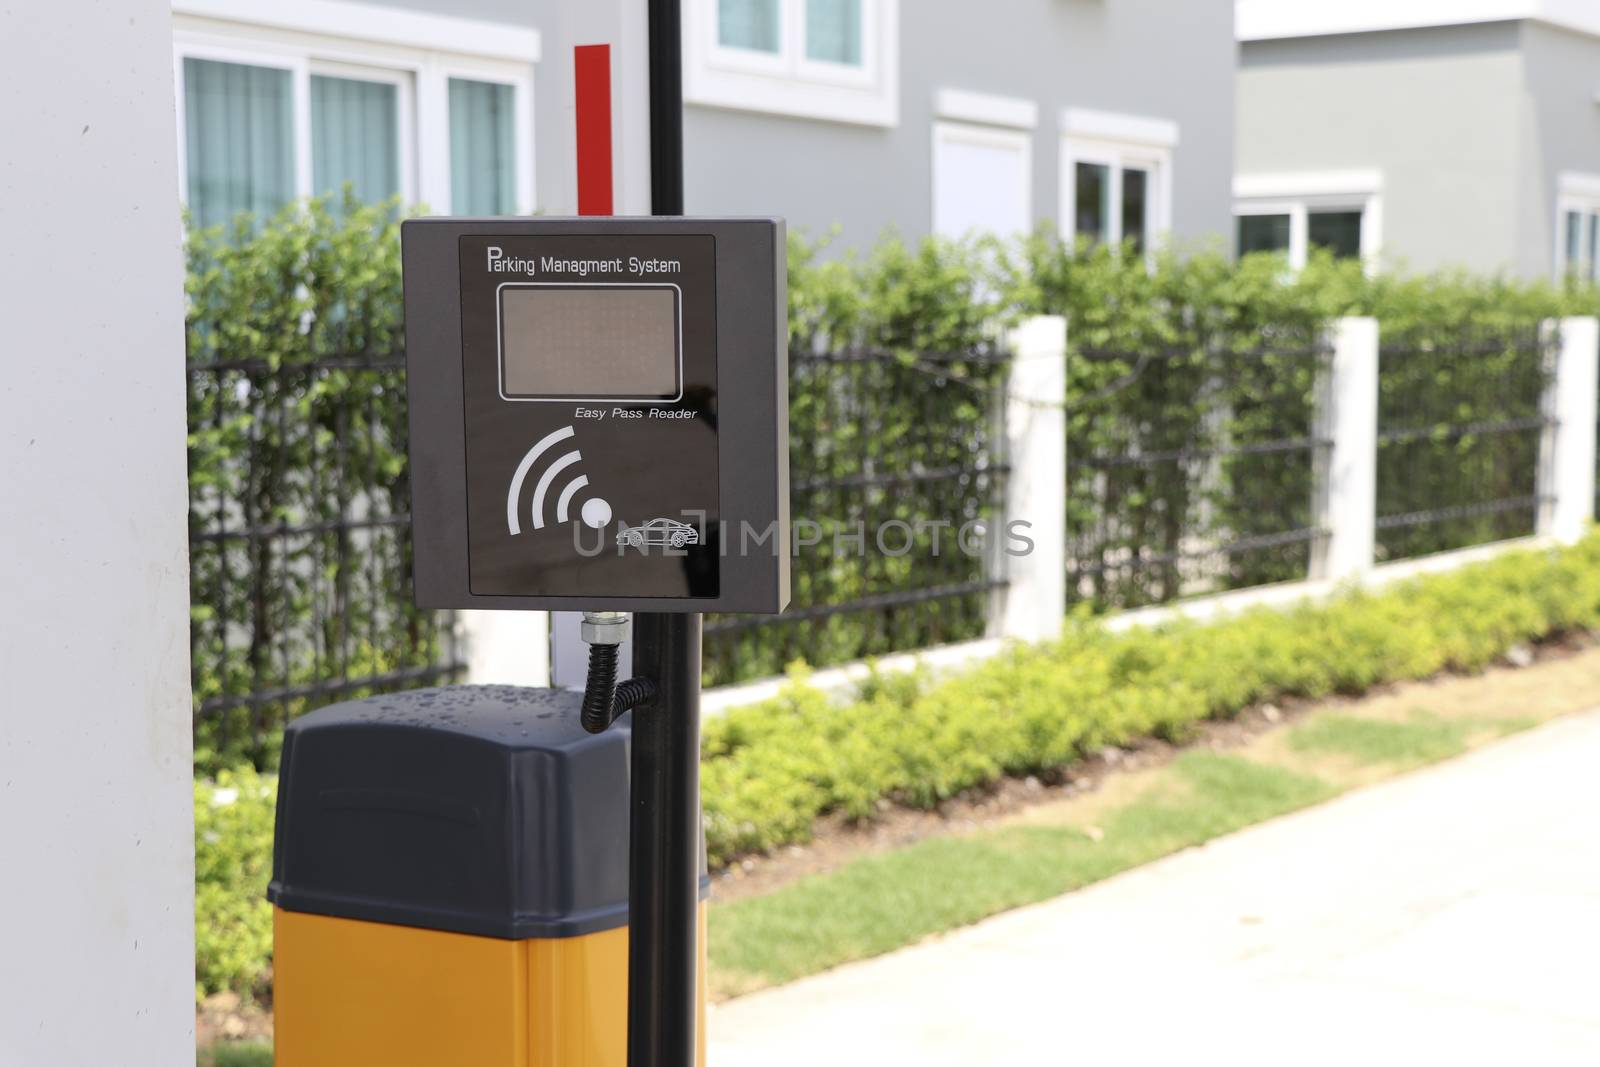 Access control of vehicles for entry and exit for safety and privacy. by Eungsuwat